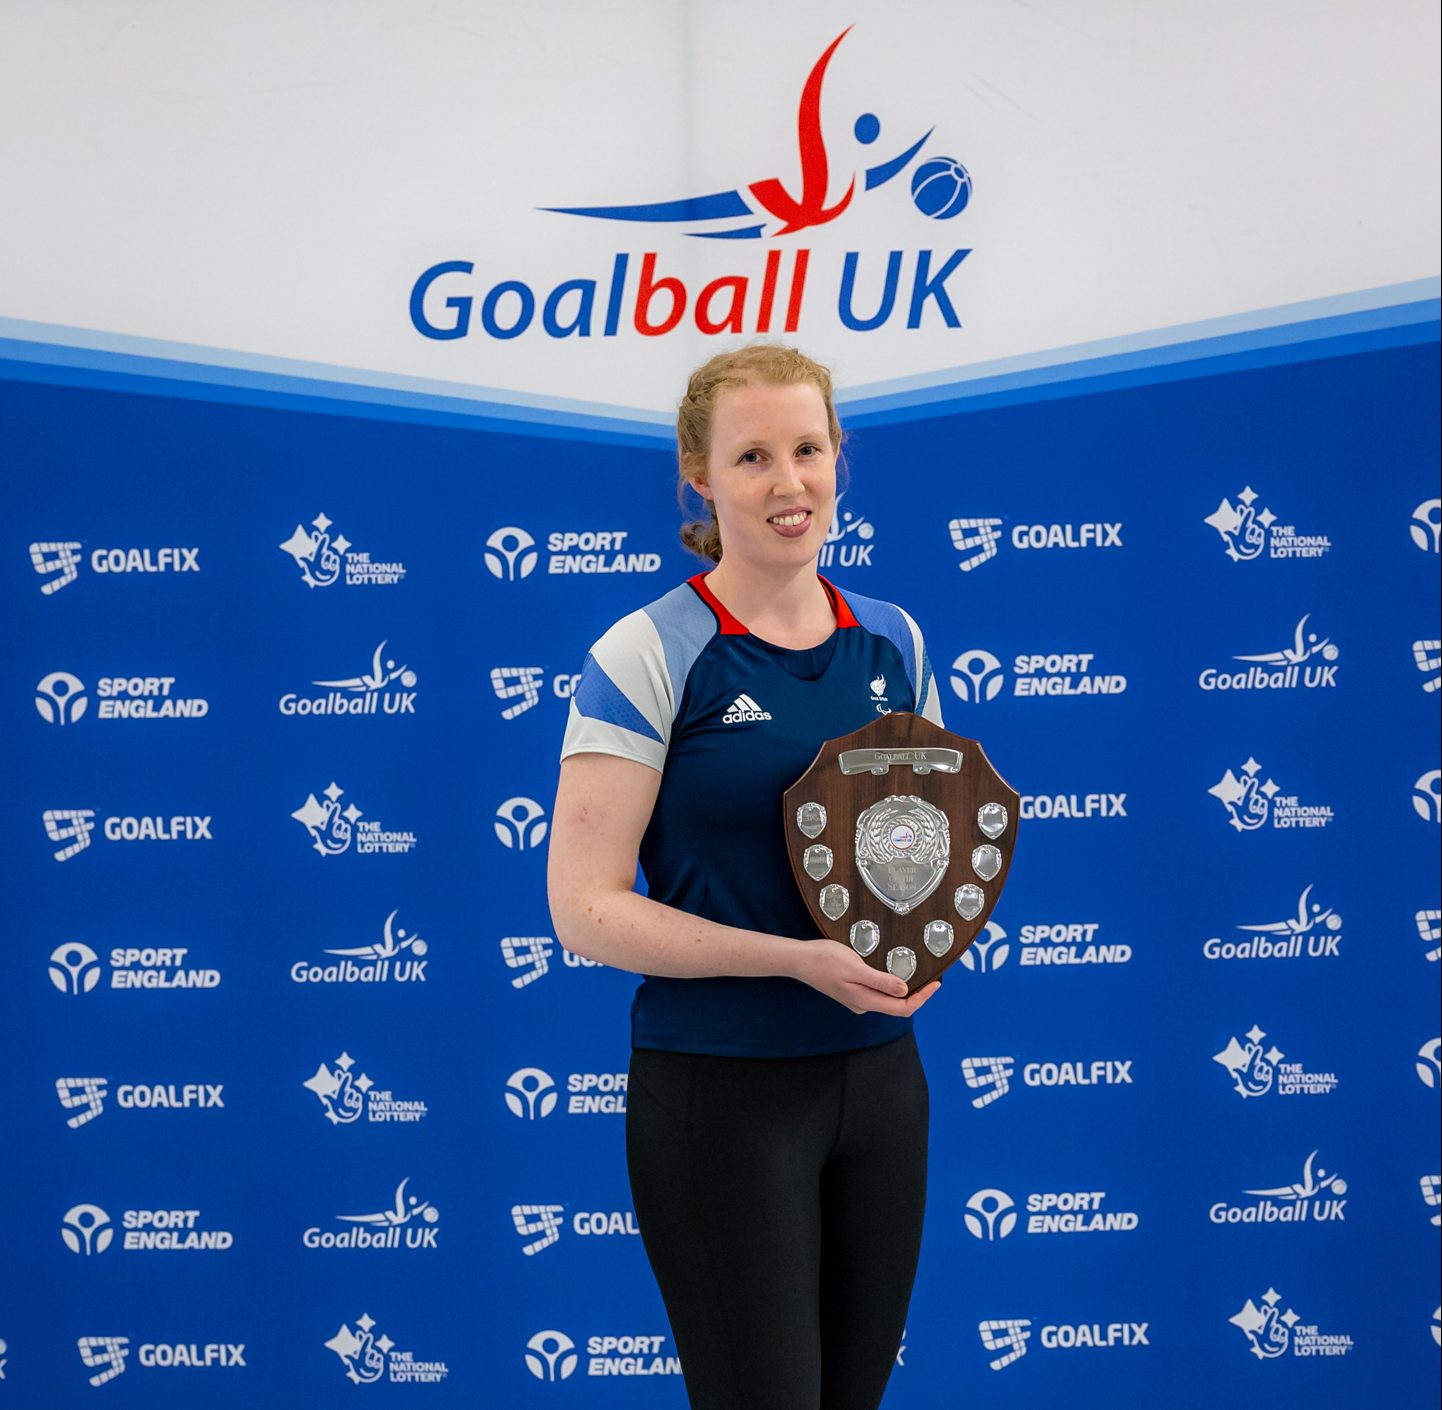 Georgie Bullen with her award in front of a Goalball UK banner.